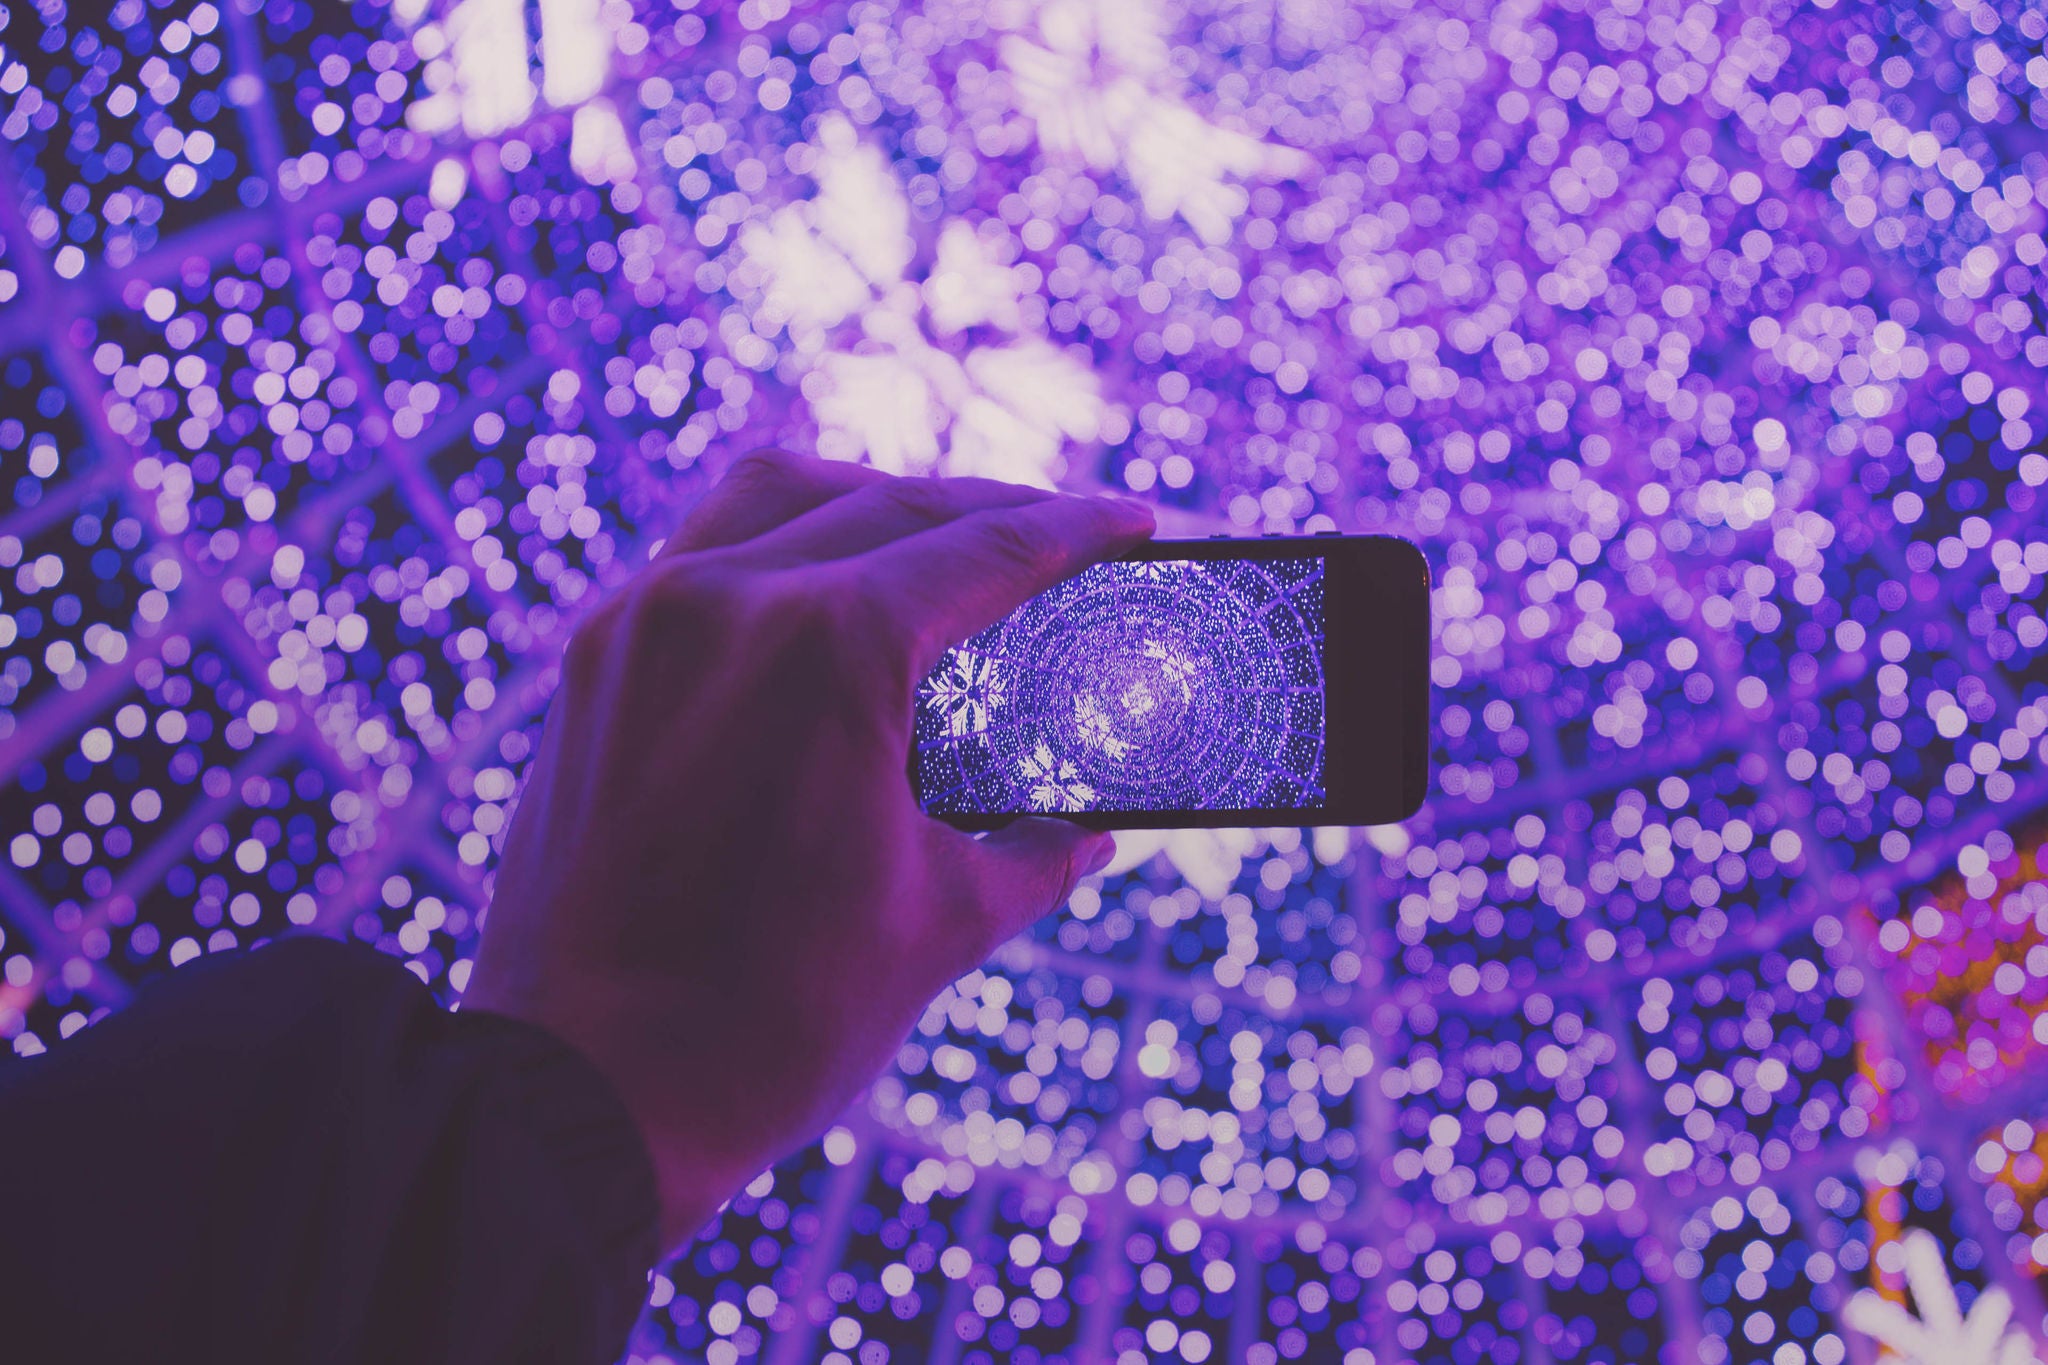 Original picture of a man taking picture with smartphone inside a big Christmas tree in Andorra la Vella for the winter festivities.